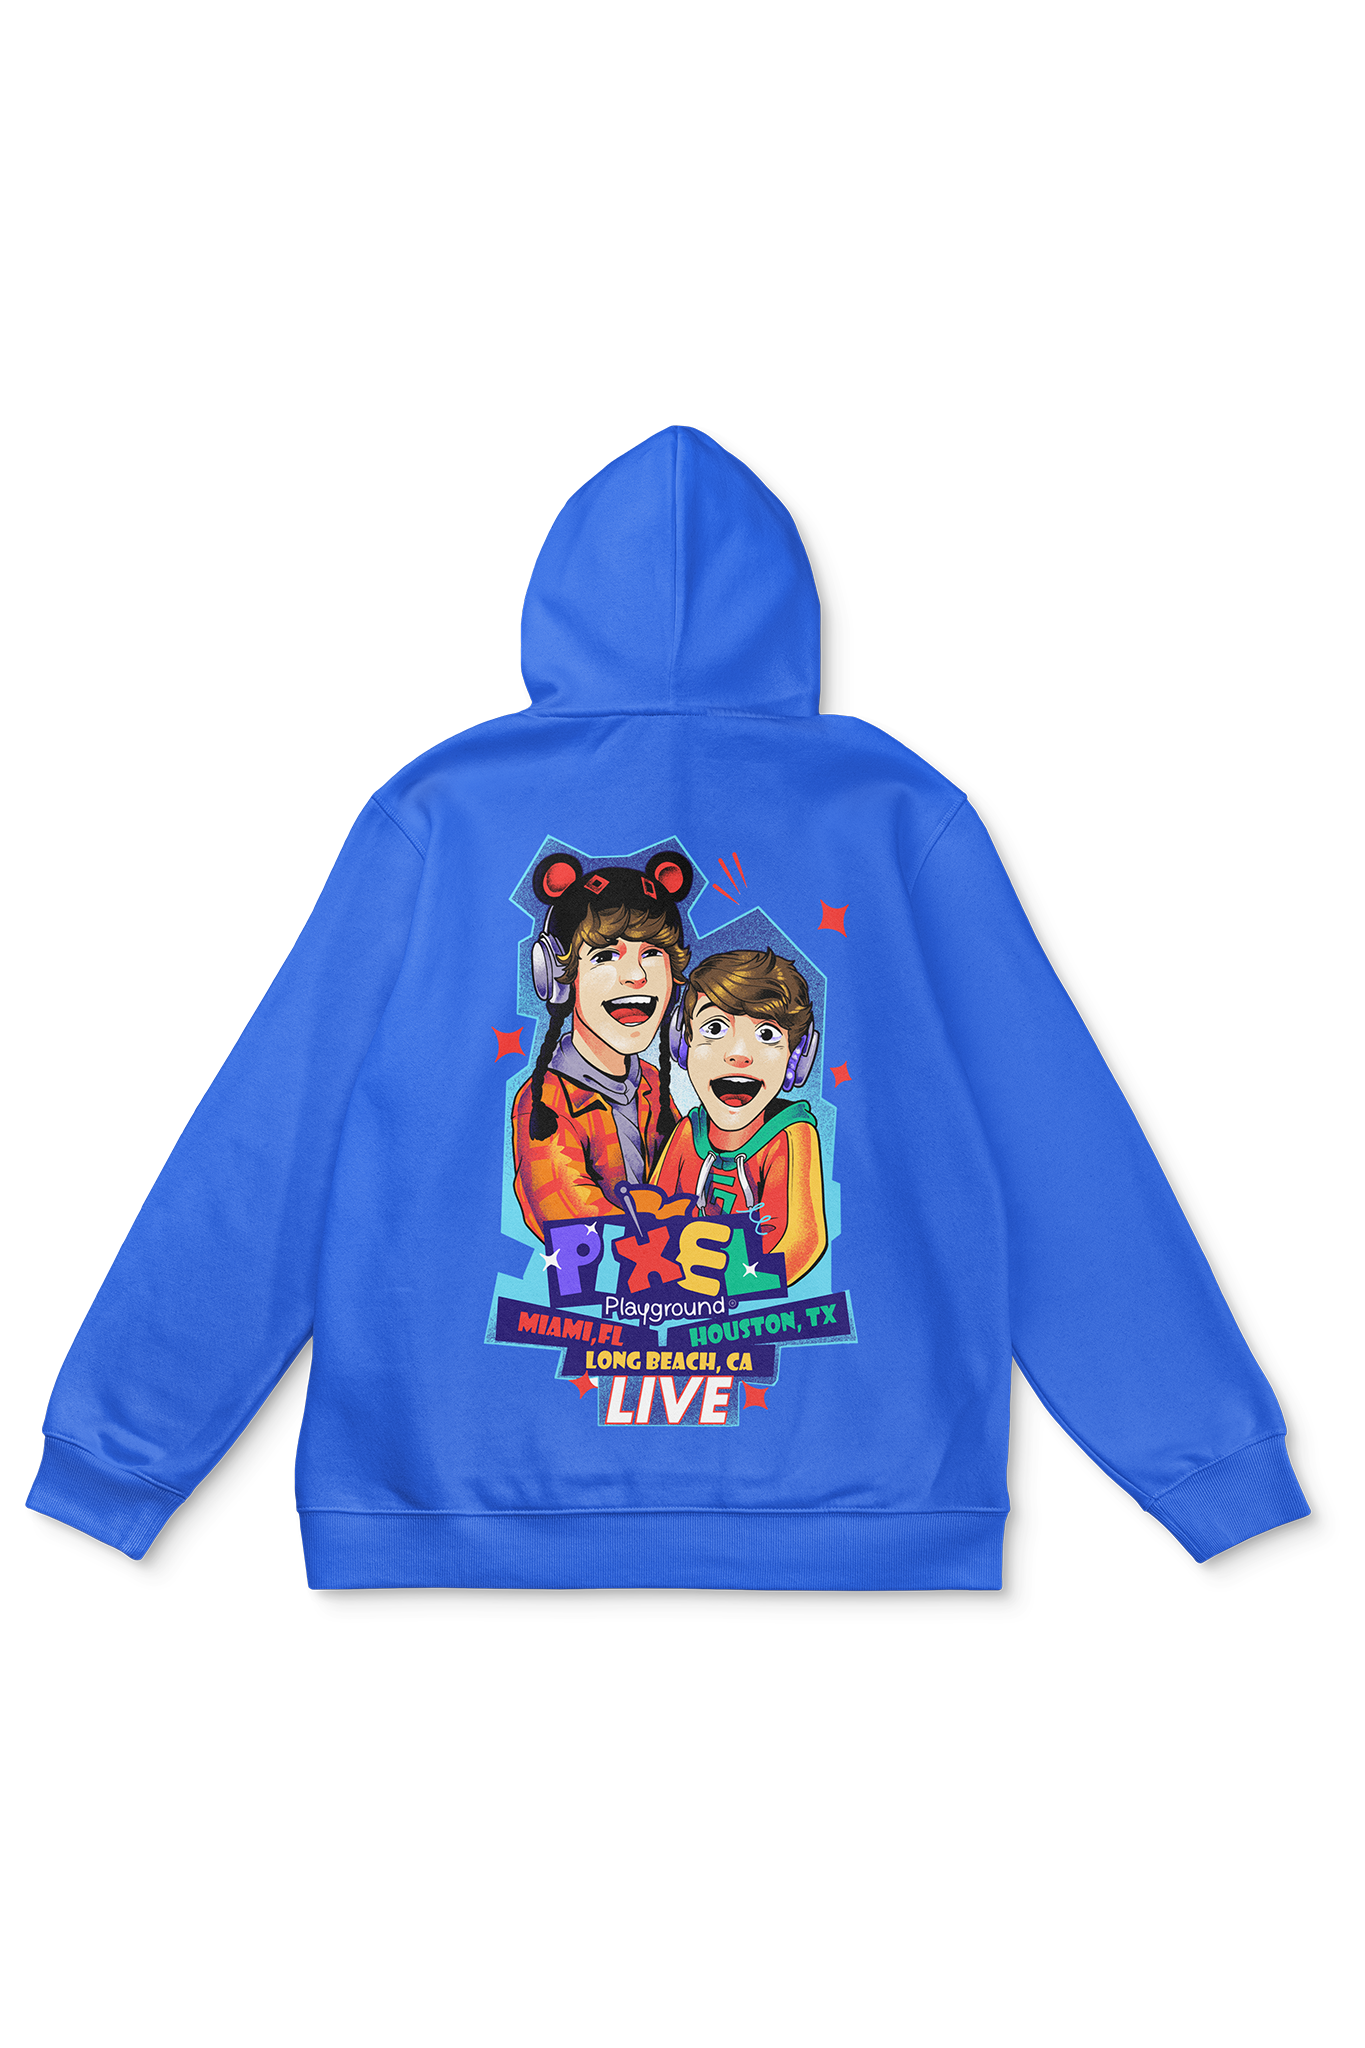 Royal blue hoodie with the Pixel Playground print across the entire back.